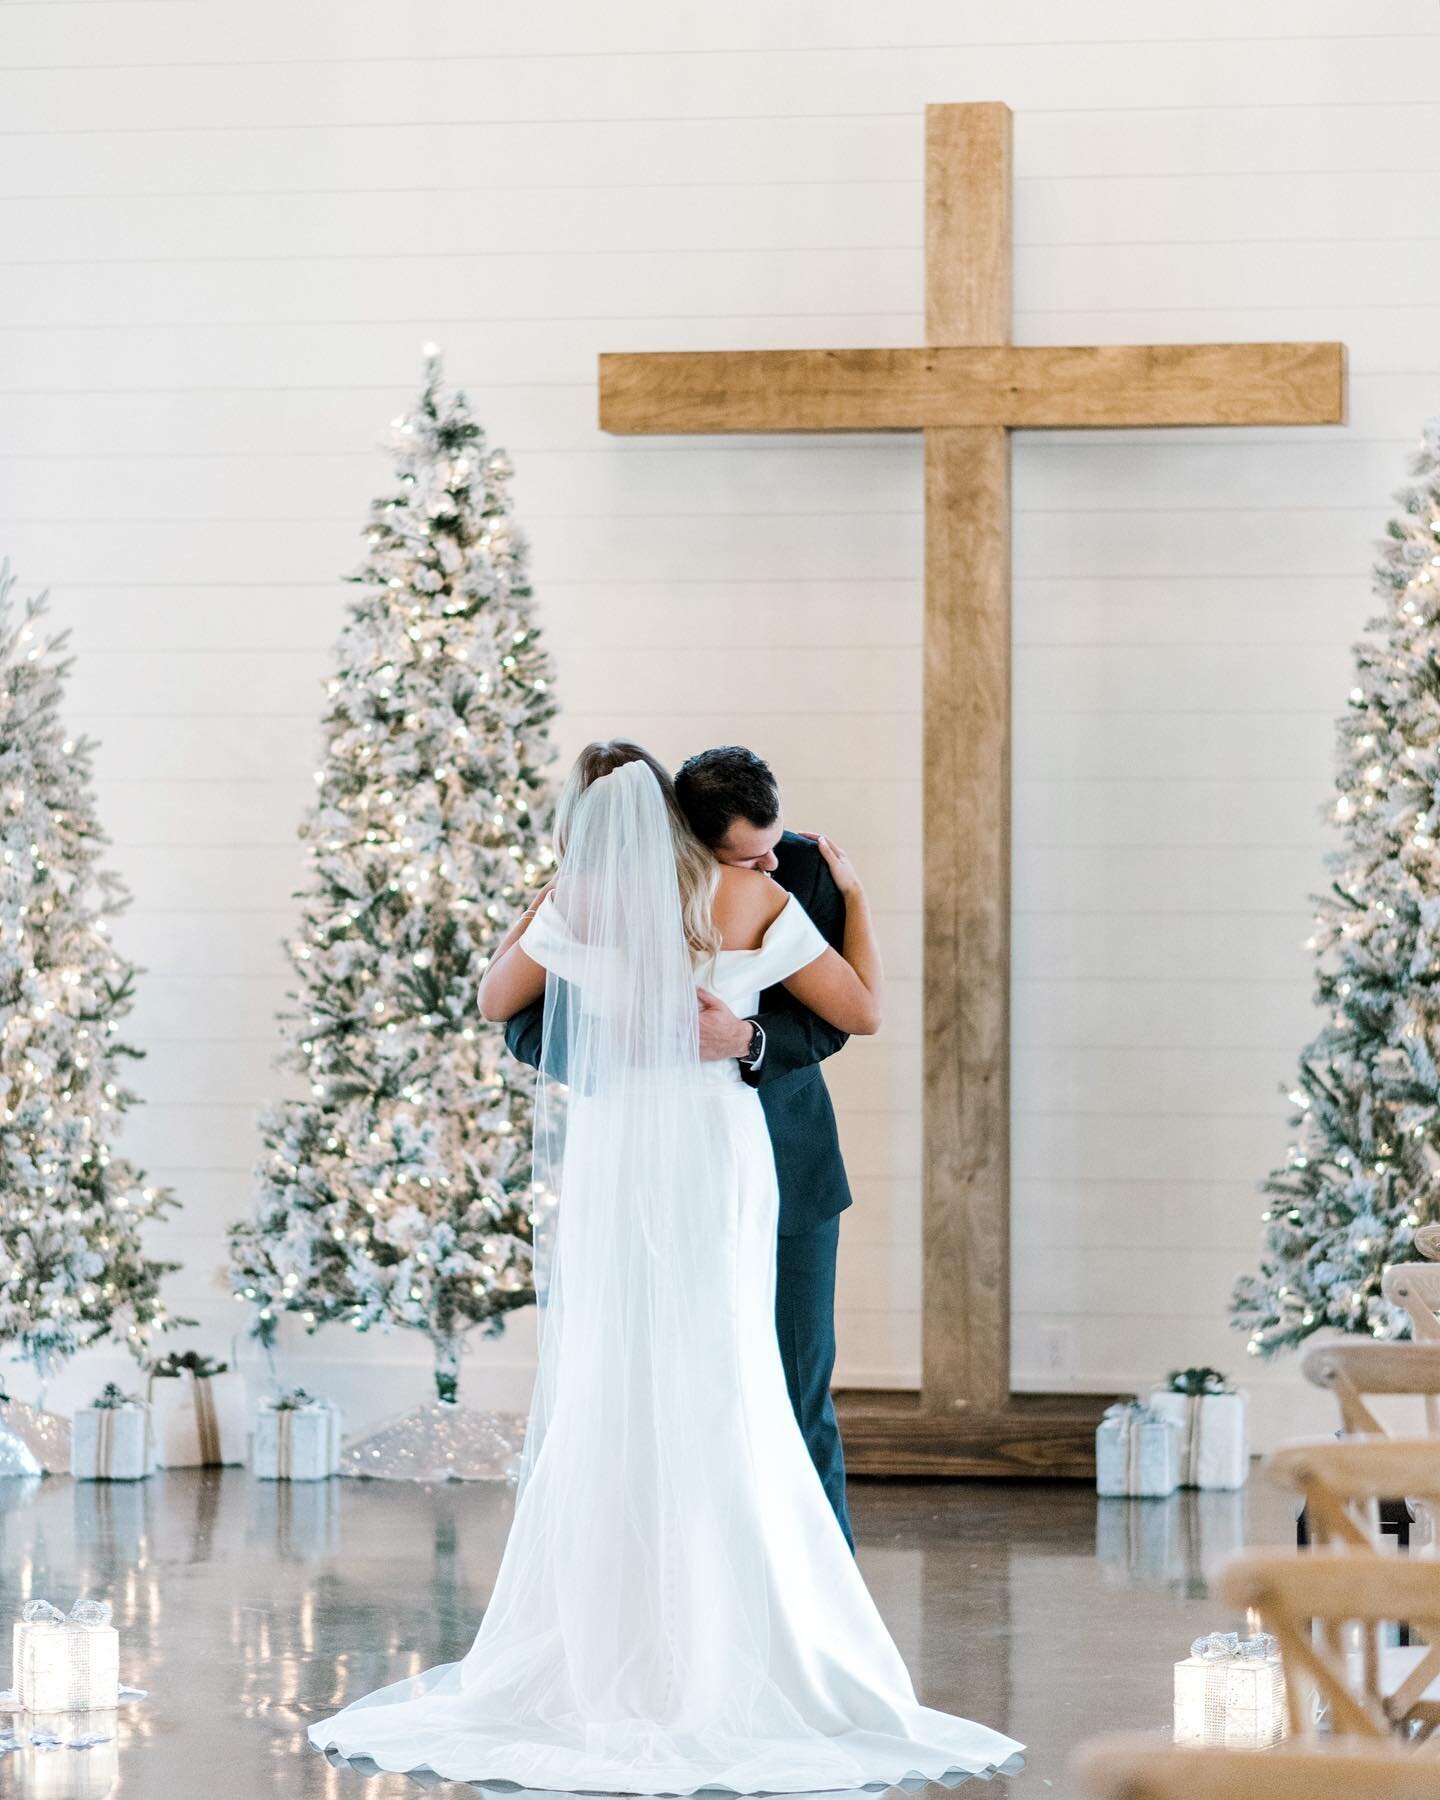 All my fave things in one photo: Christmas trees, first looks, and the sweetest bride and groom (and the cross of course bc JESUS!!)!!!